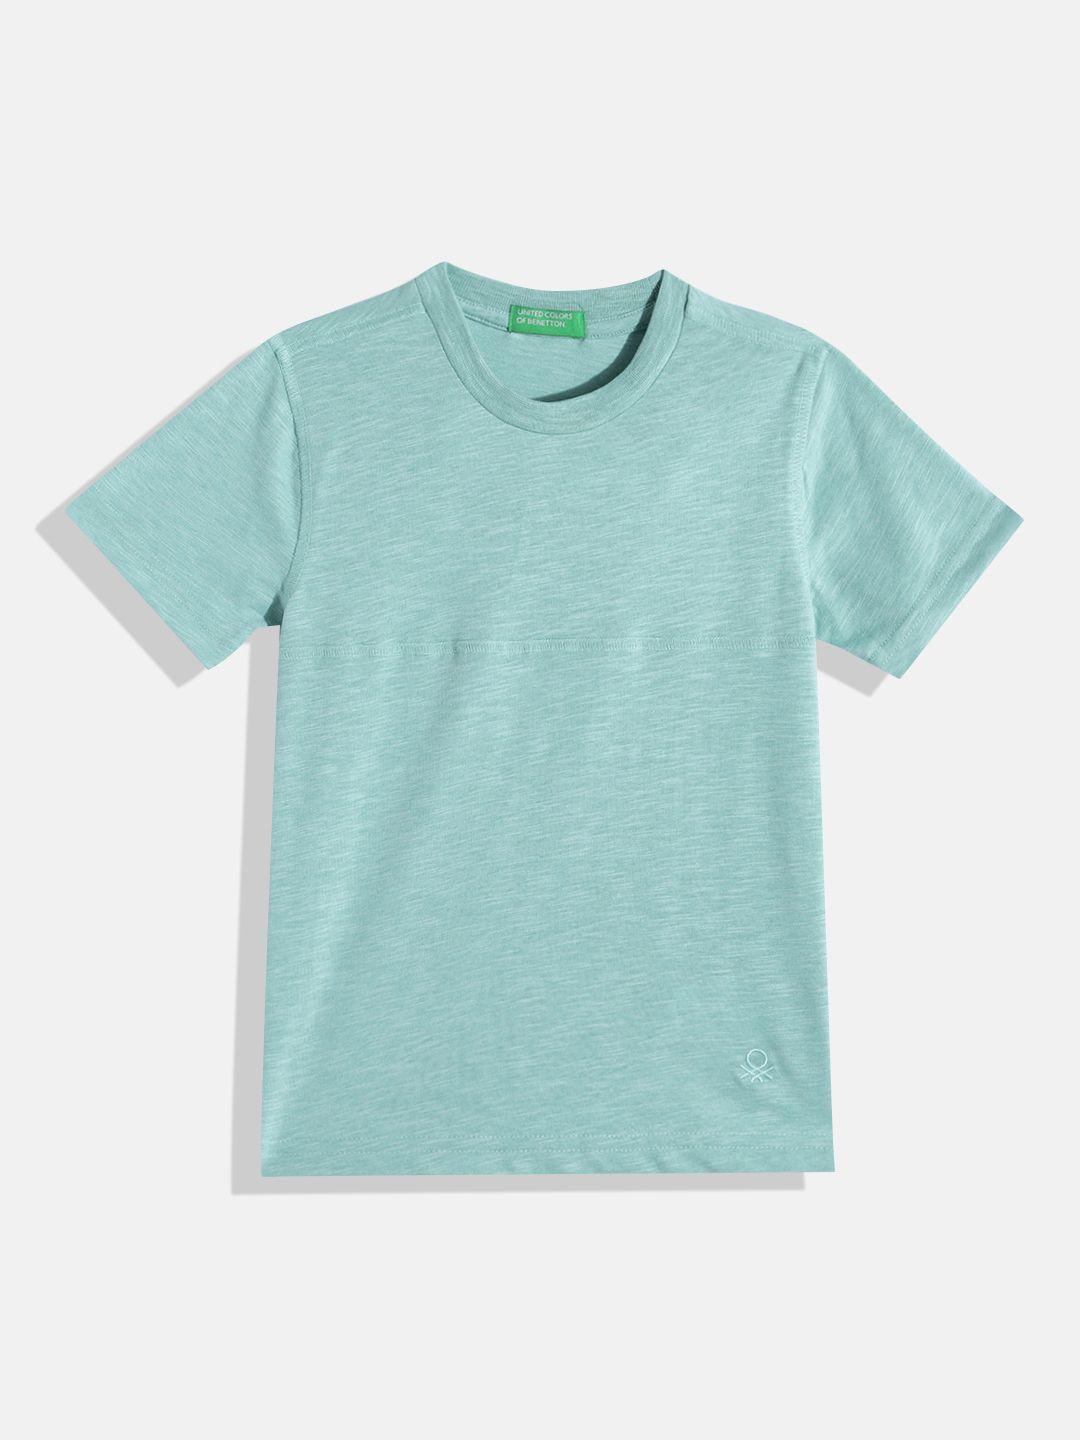 united colors of benetton boys solid t-shirt